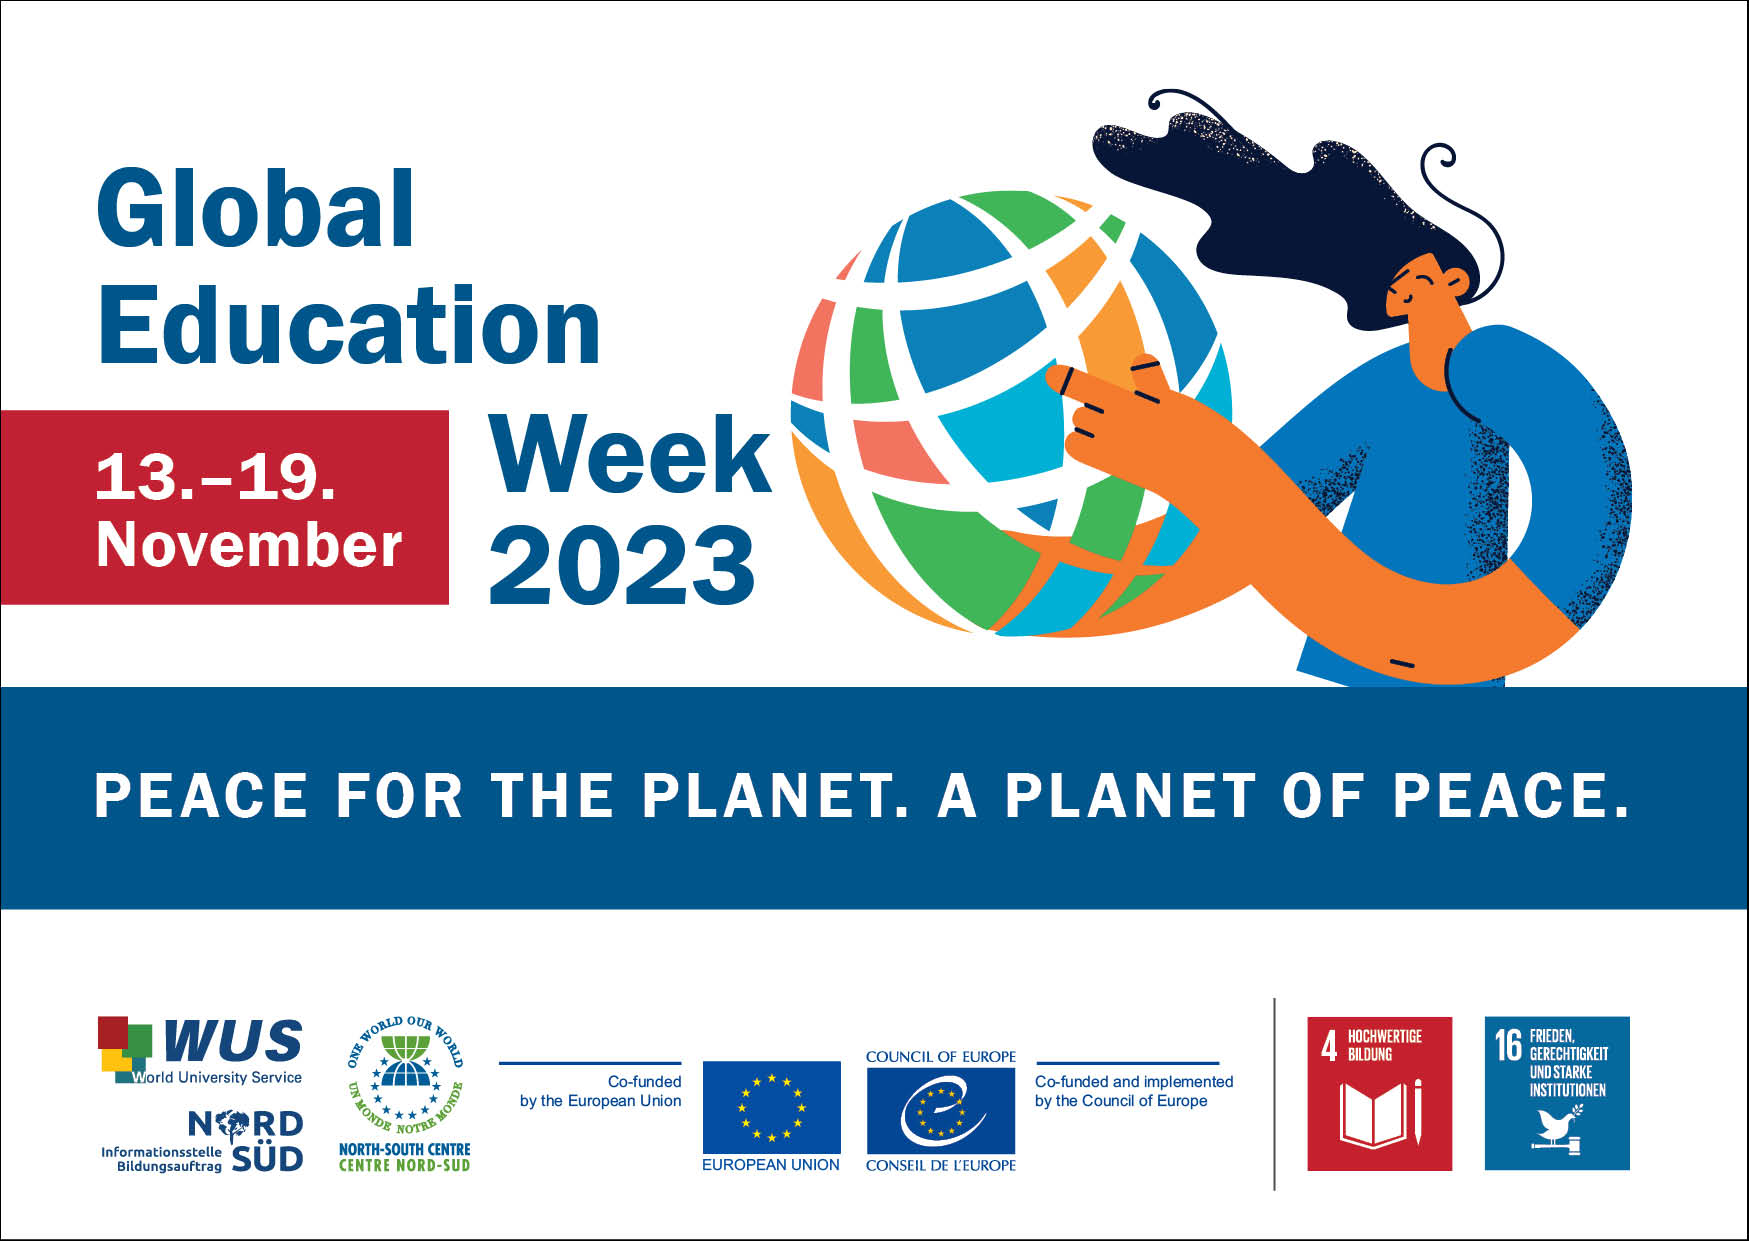 Einladung zur Global Education Week | vom 13. bis 19. November 2023 | Peace for the planet. a planet of peace.